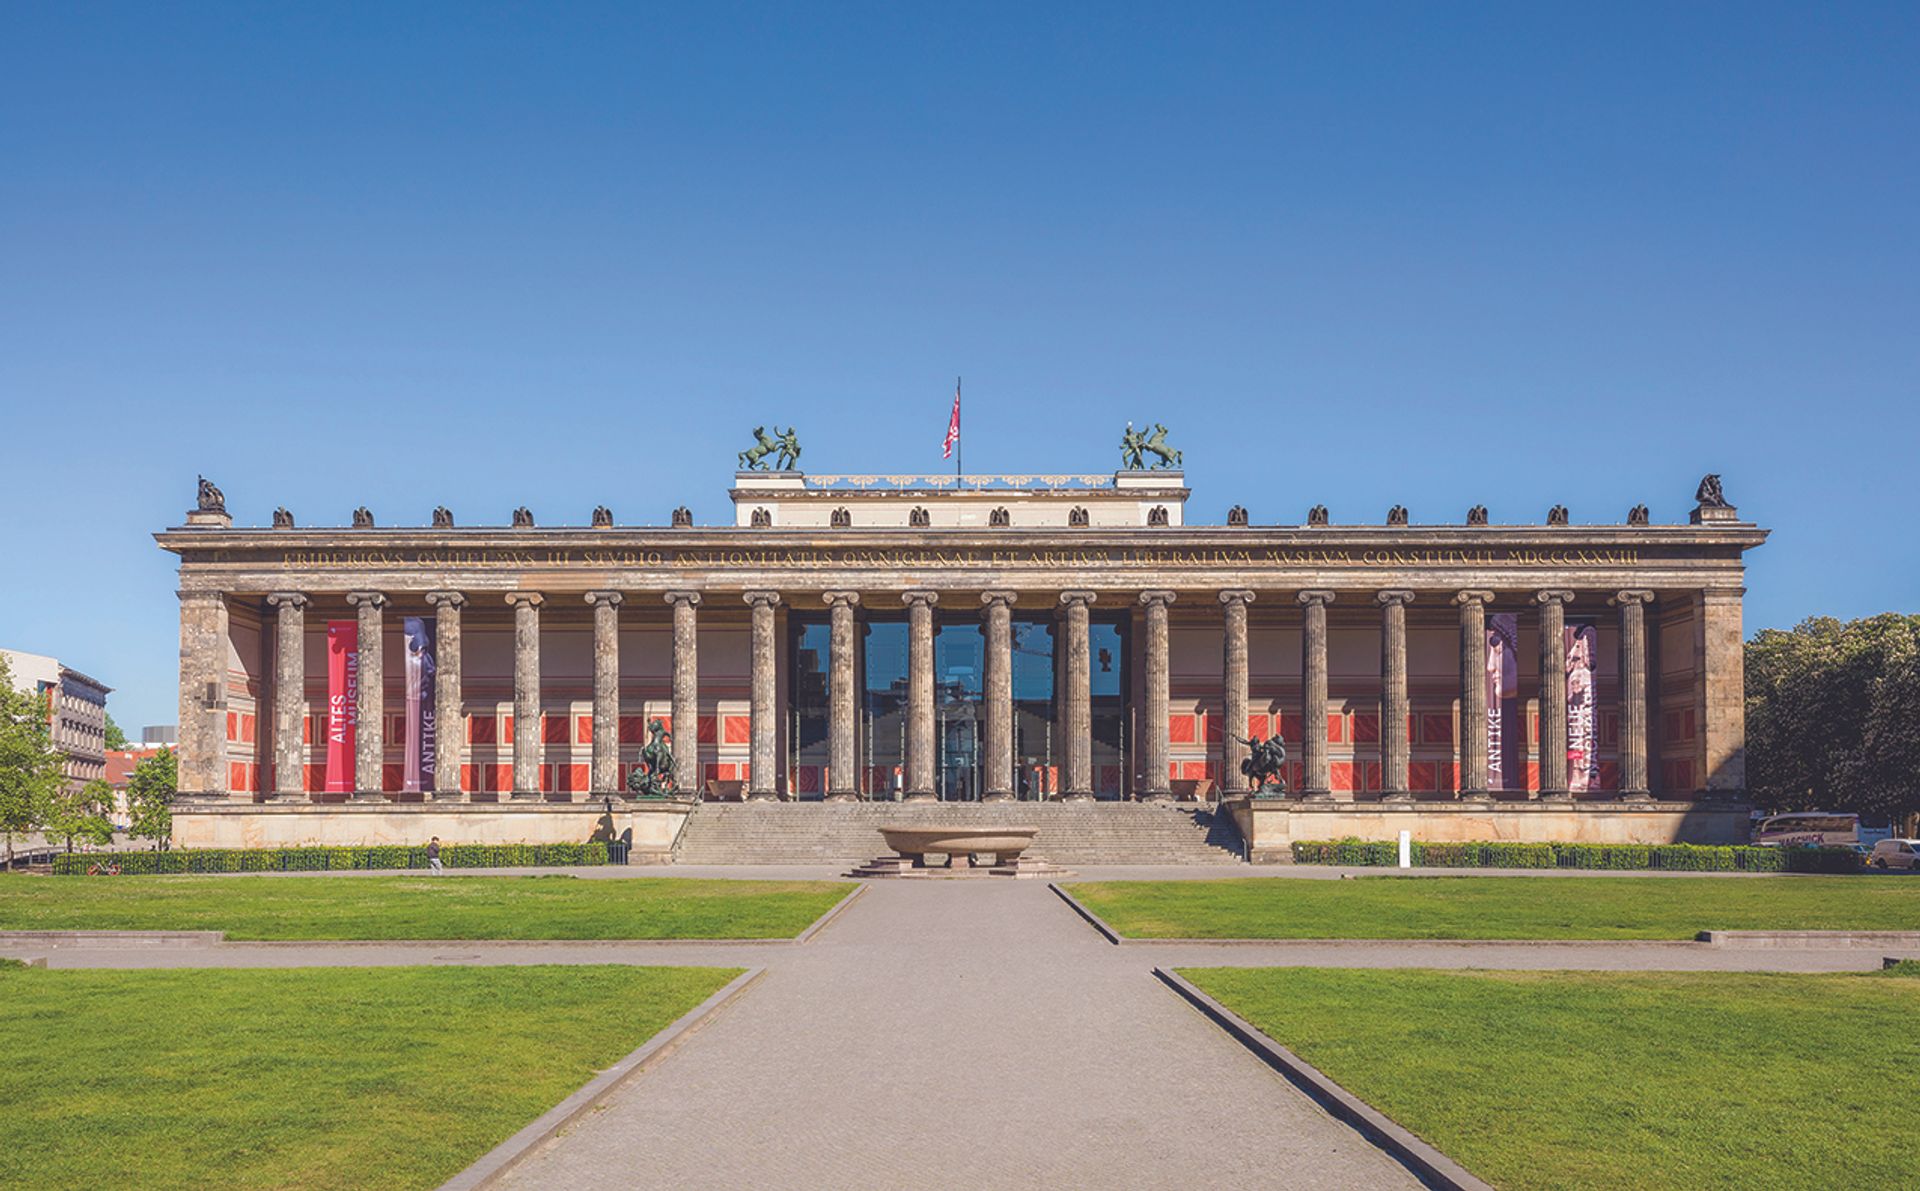 Berlin’s Altes Museum is one of the institutions due to gain more autonomy from the Prussian Cultural Heritage Foundation following a wide-ranging review of the organisation

© Staatliche Museen zu Berlin/David von Becker